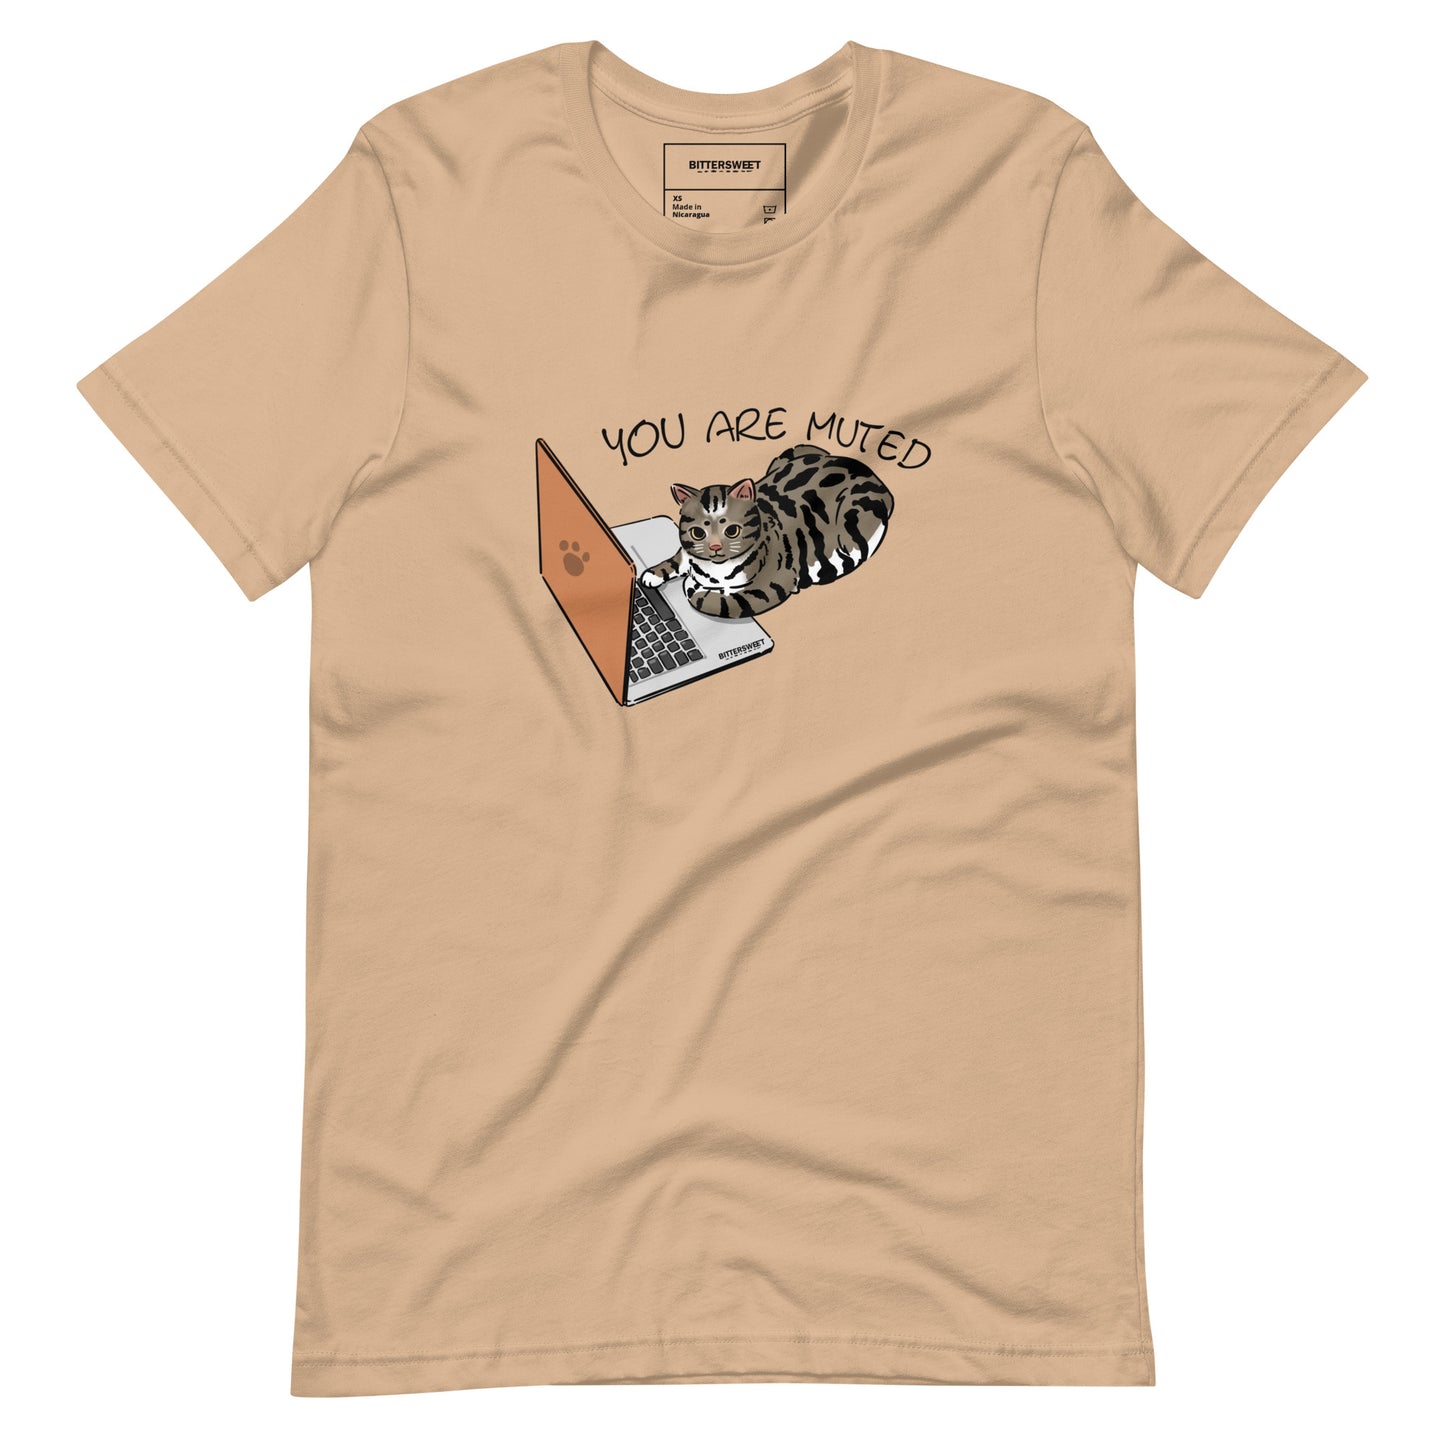 You are muted cat funny graphic T-shirt